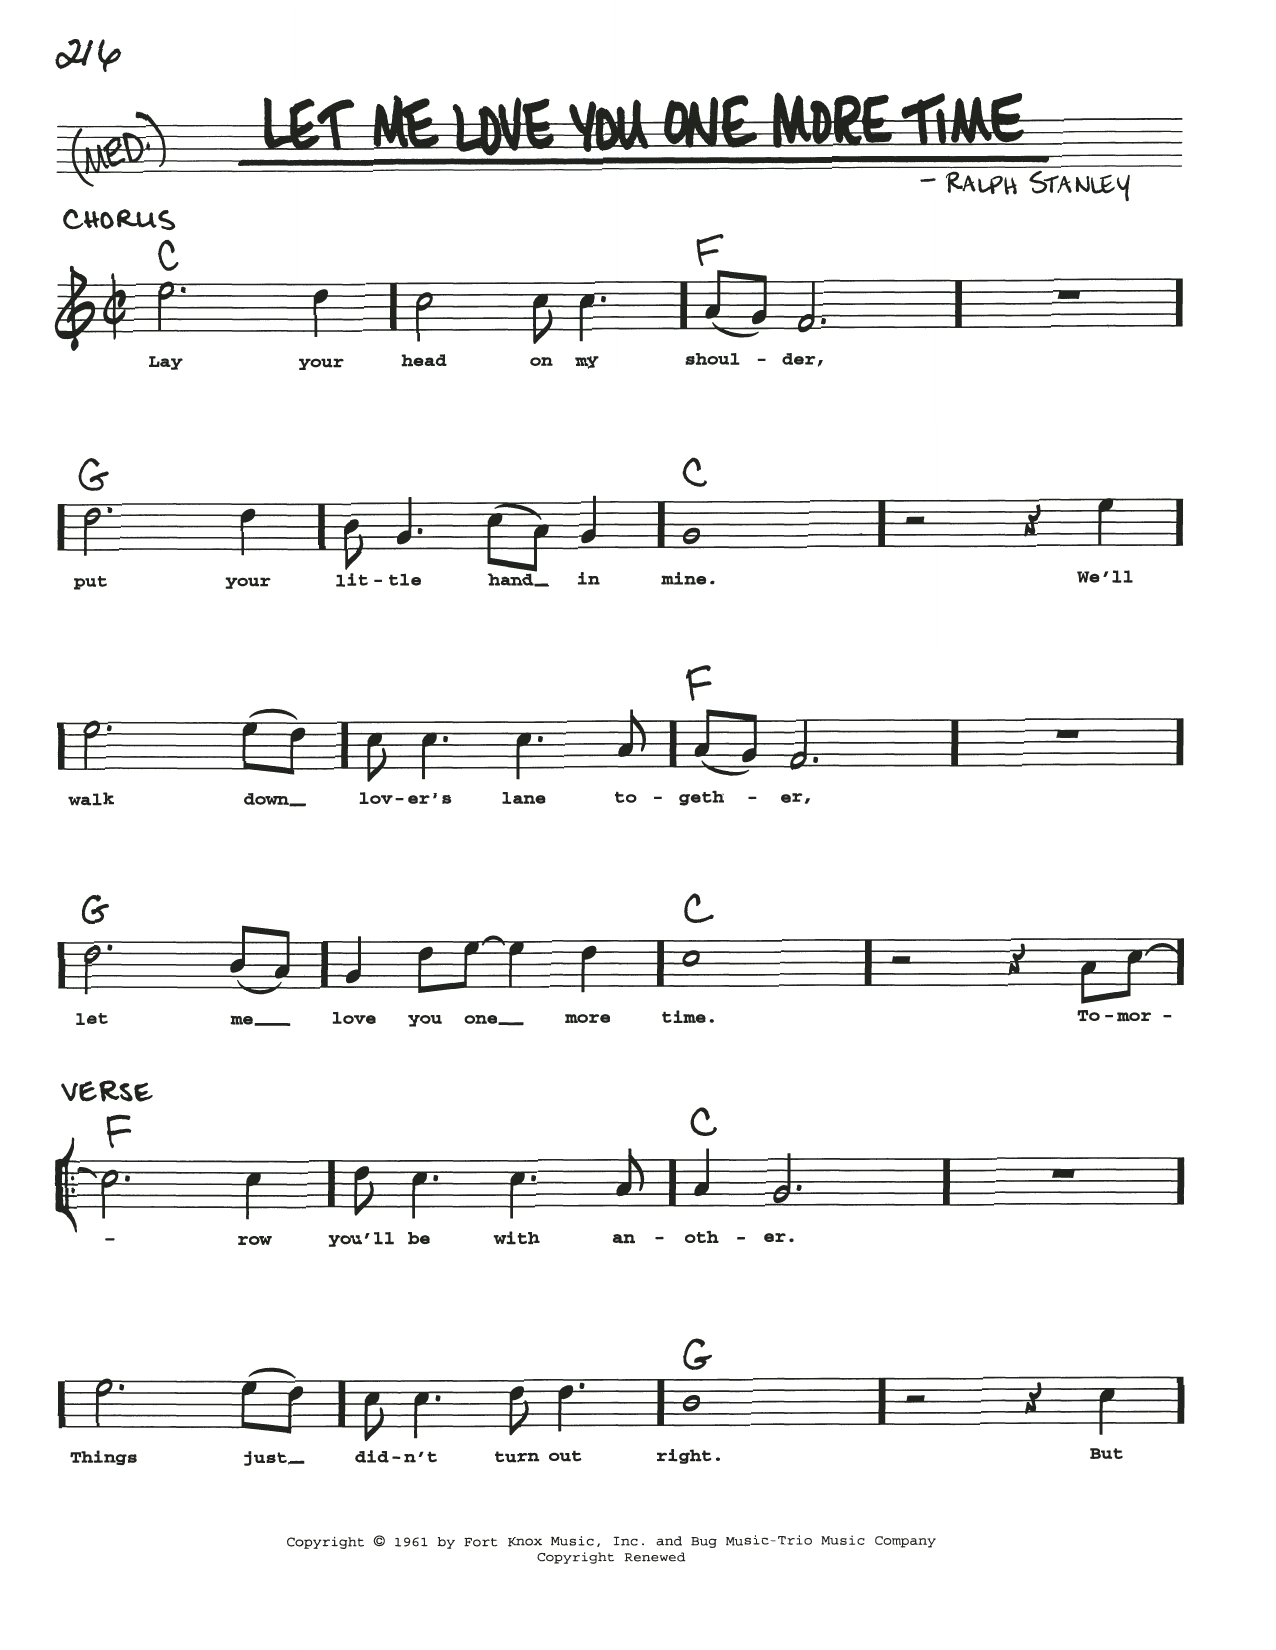 Download Ralph Stanley Let Me Love You One More Time Sheet Music